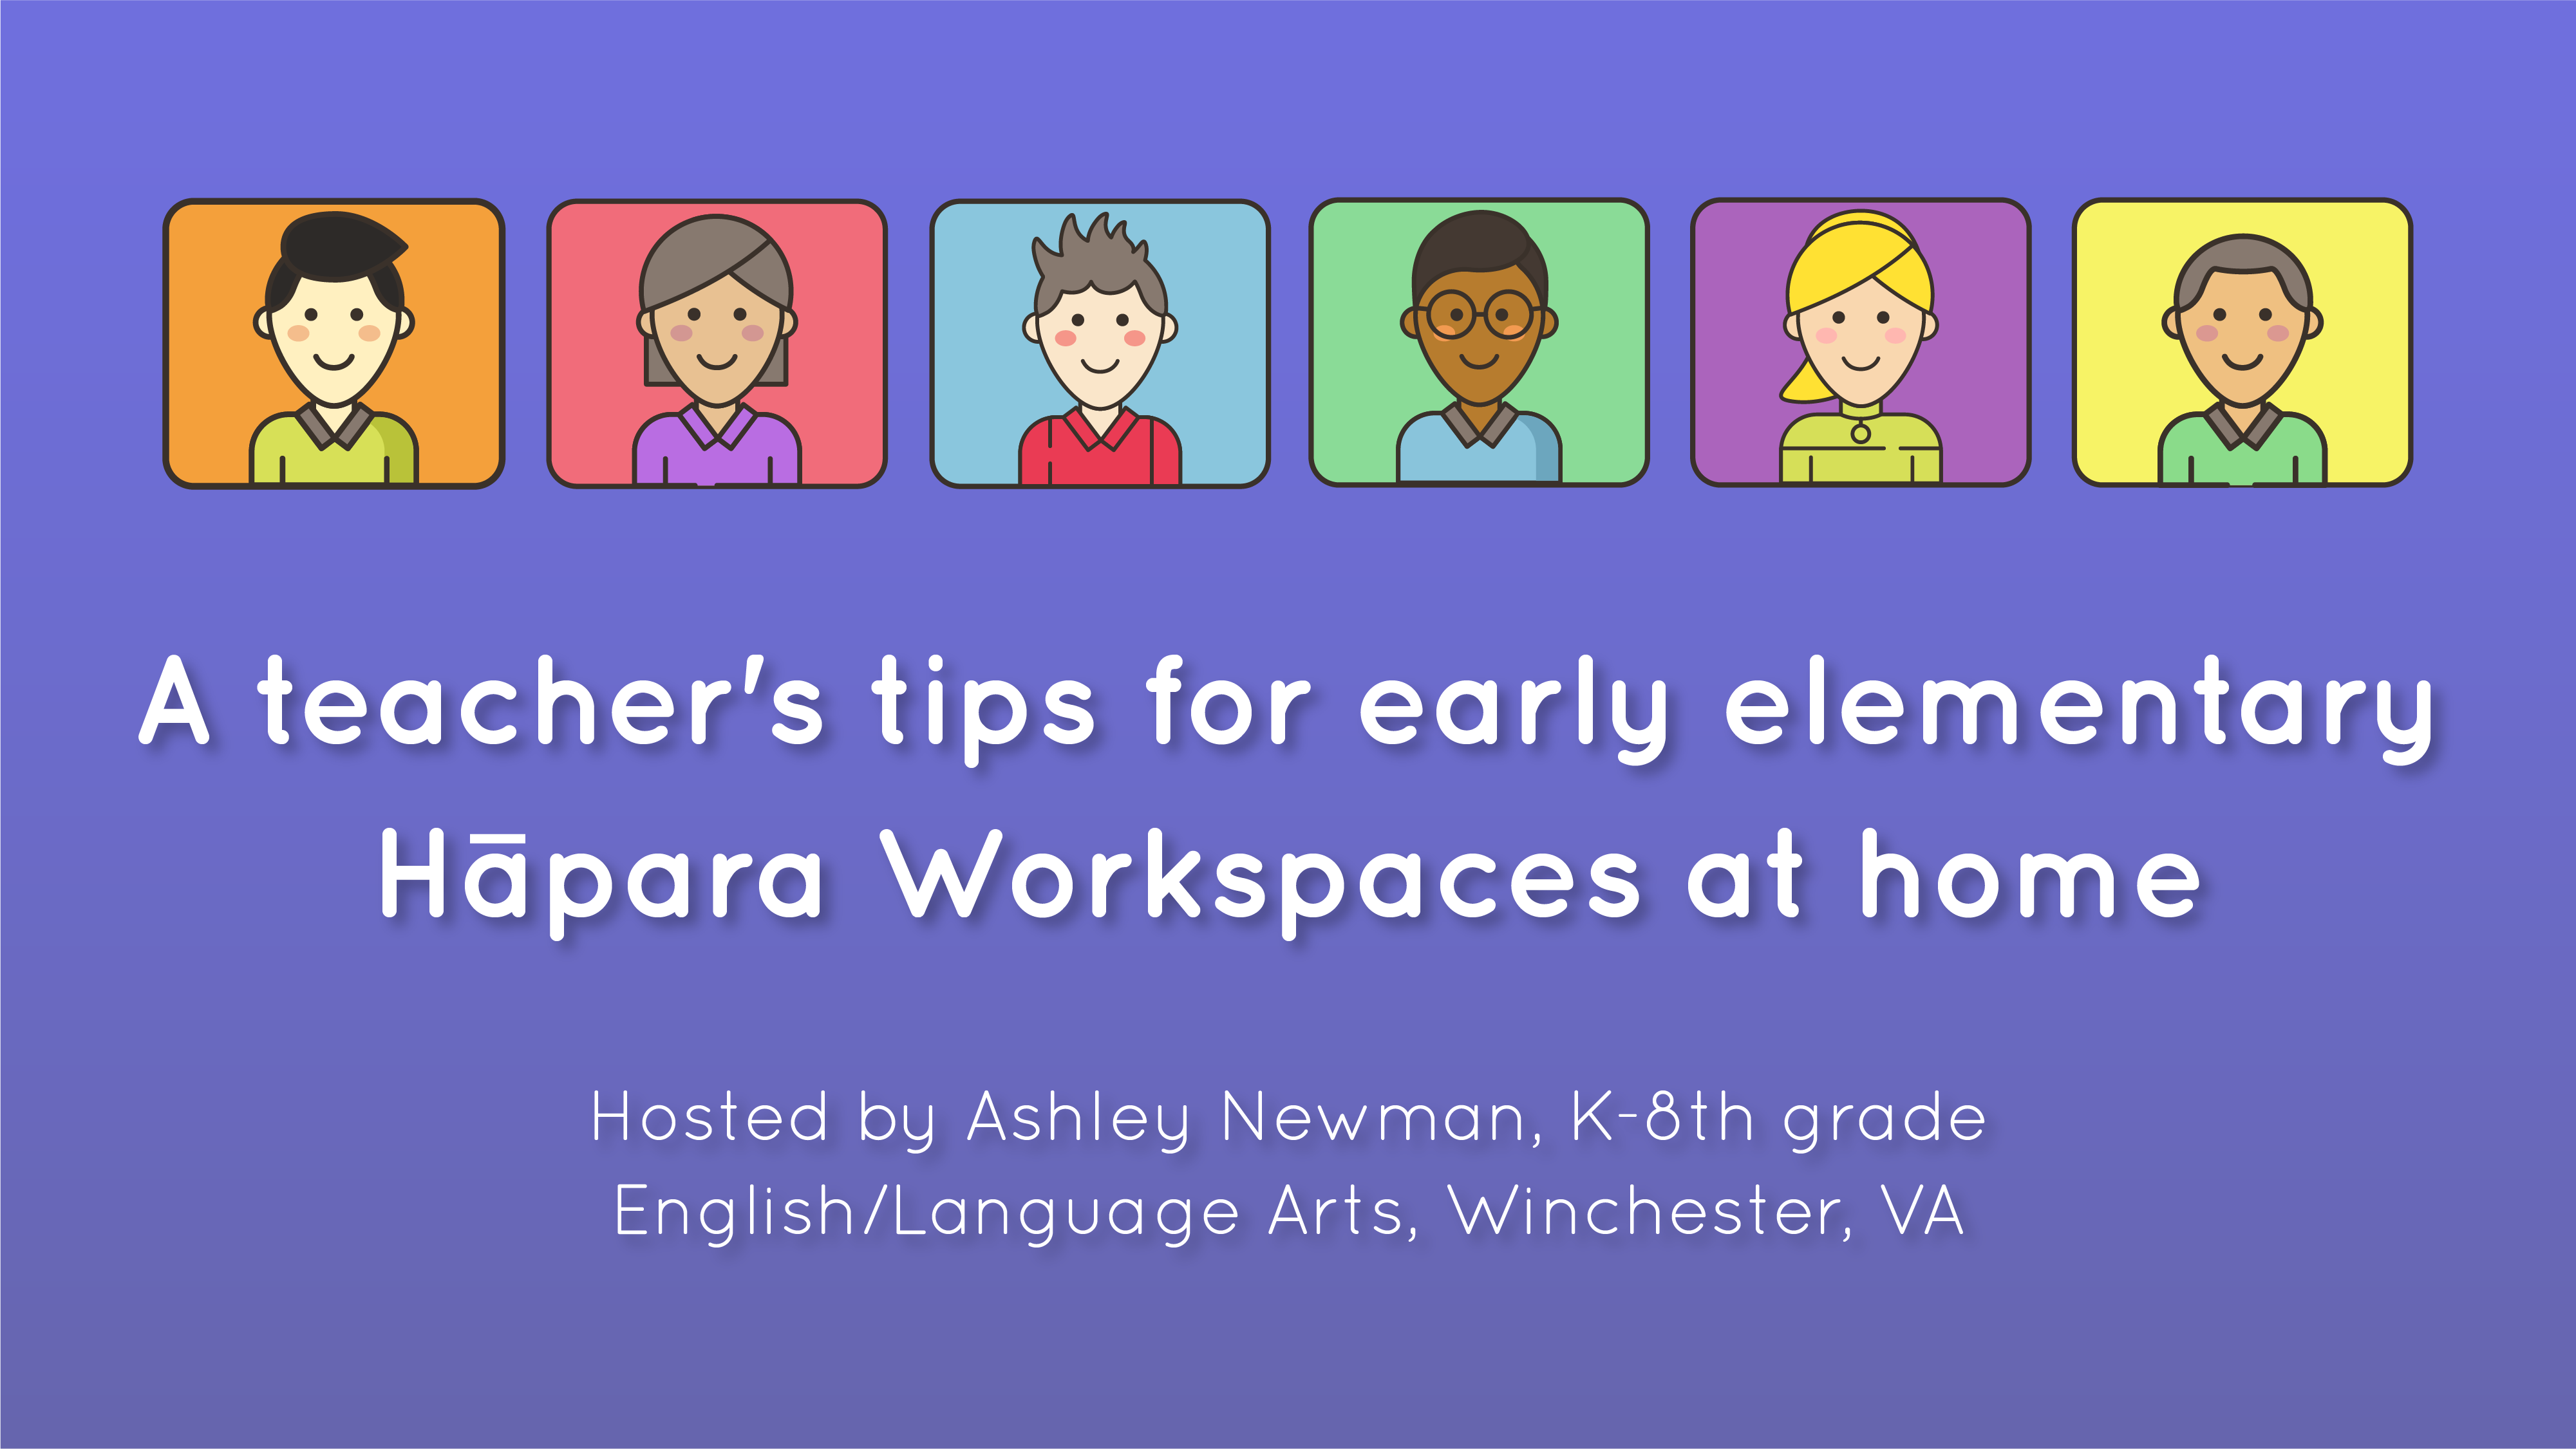 A teacher's tips for early elementary Hāpara Workspaces at home